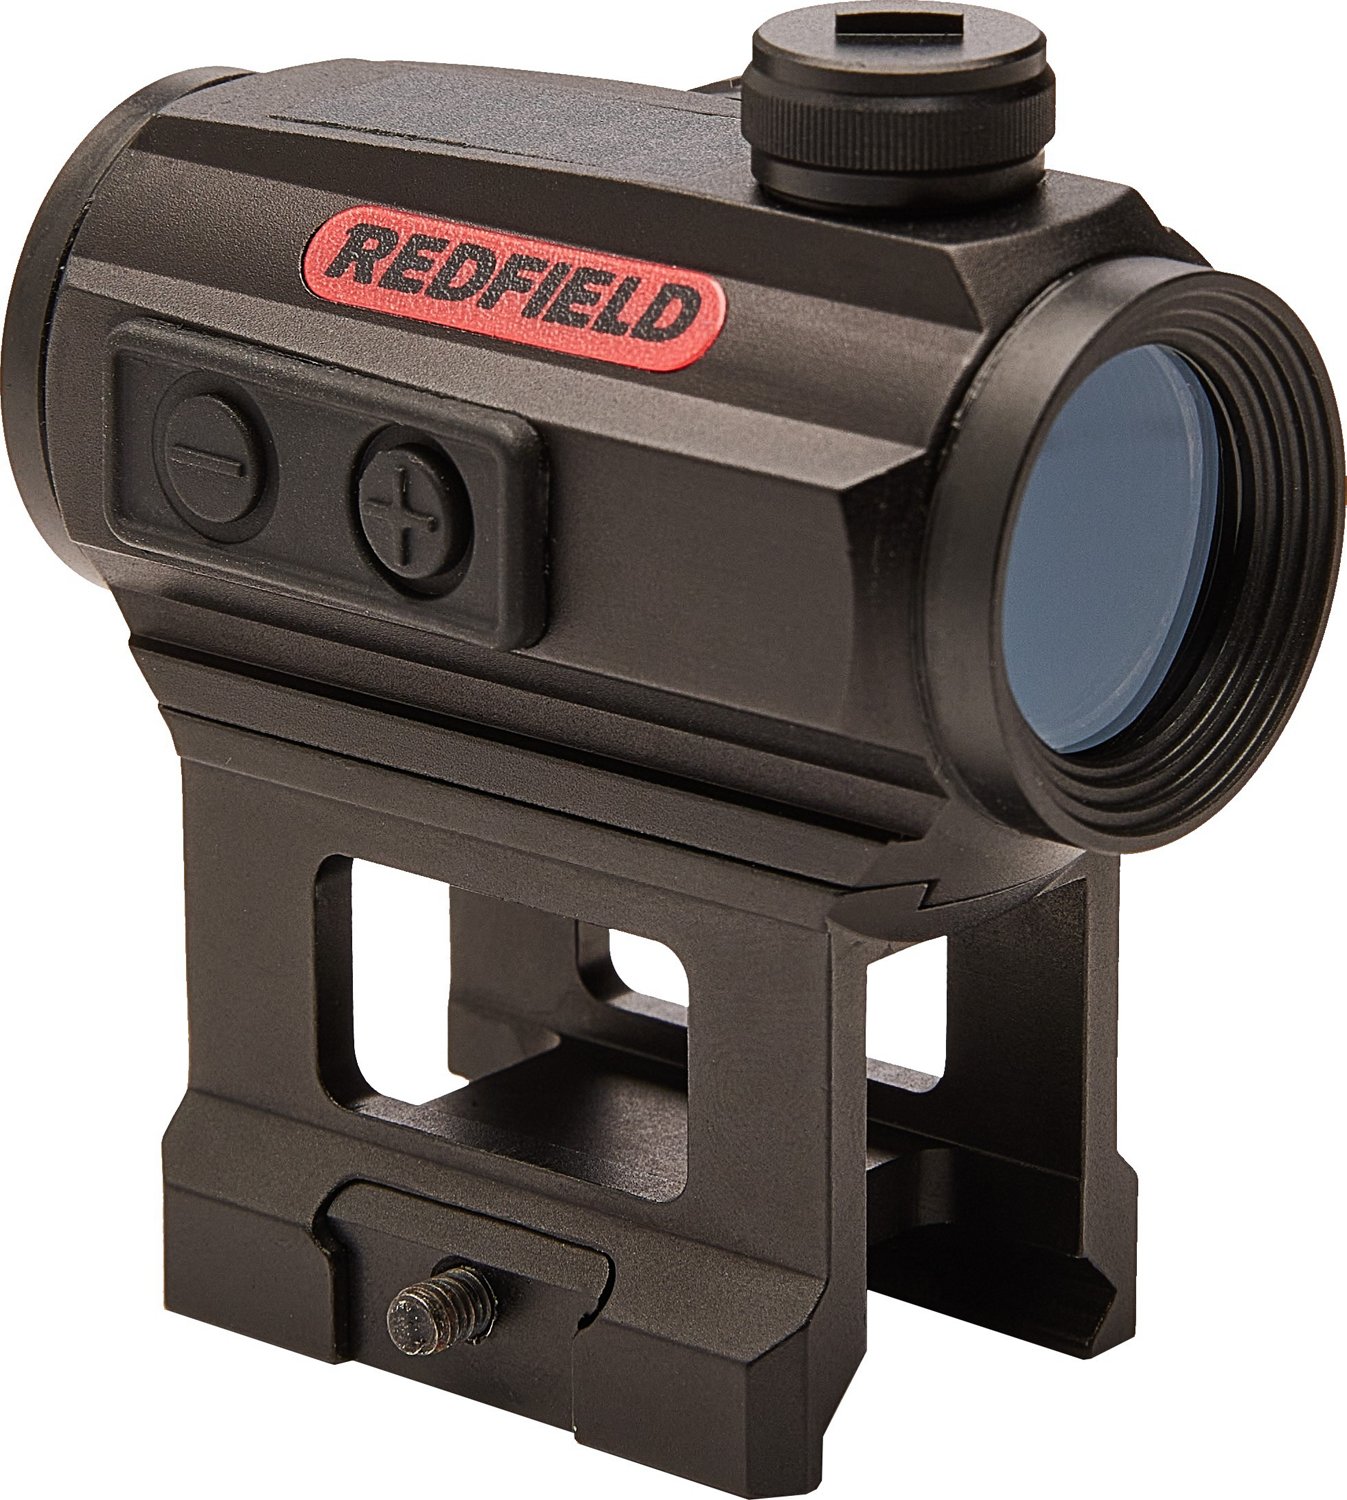 Redfield Ace Solar Red Dot Sight Free Shipping At Academy